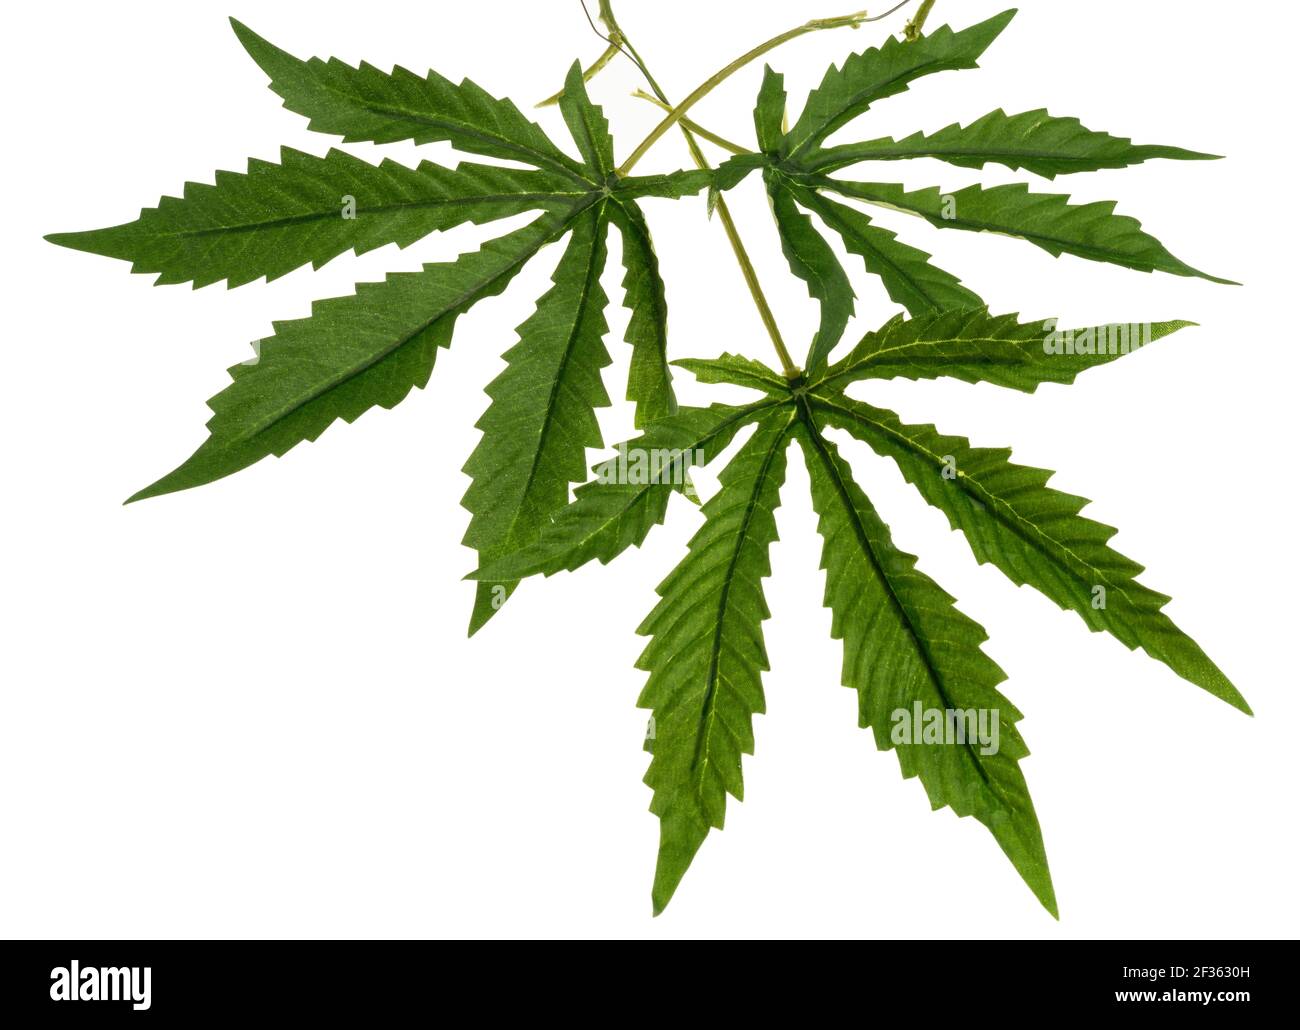 Very good fake cannabis leaves. Iconic shape of a cannabis plant leaf. Serrated edged green leaf. Stock Photo